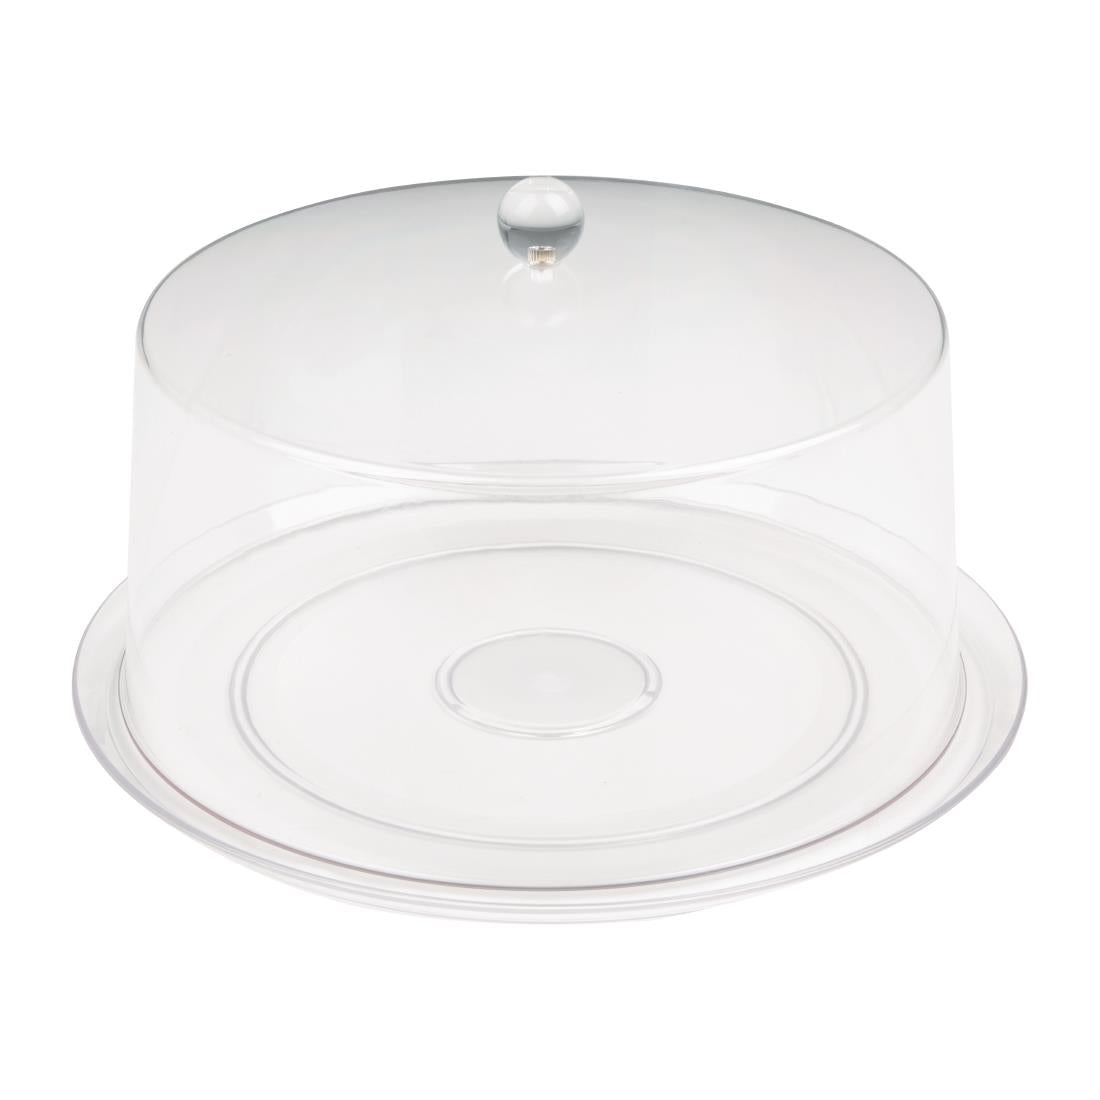 Olympia Kristallon Polycarbonate Display Cover Clear 308(Ã˜) x 190(H)mm